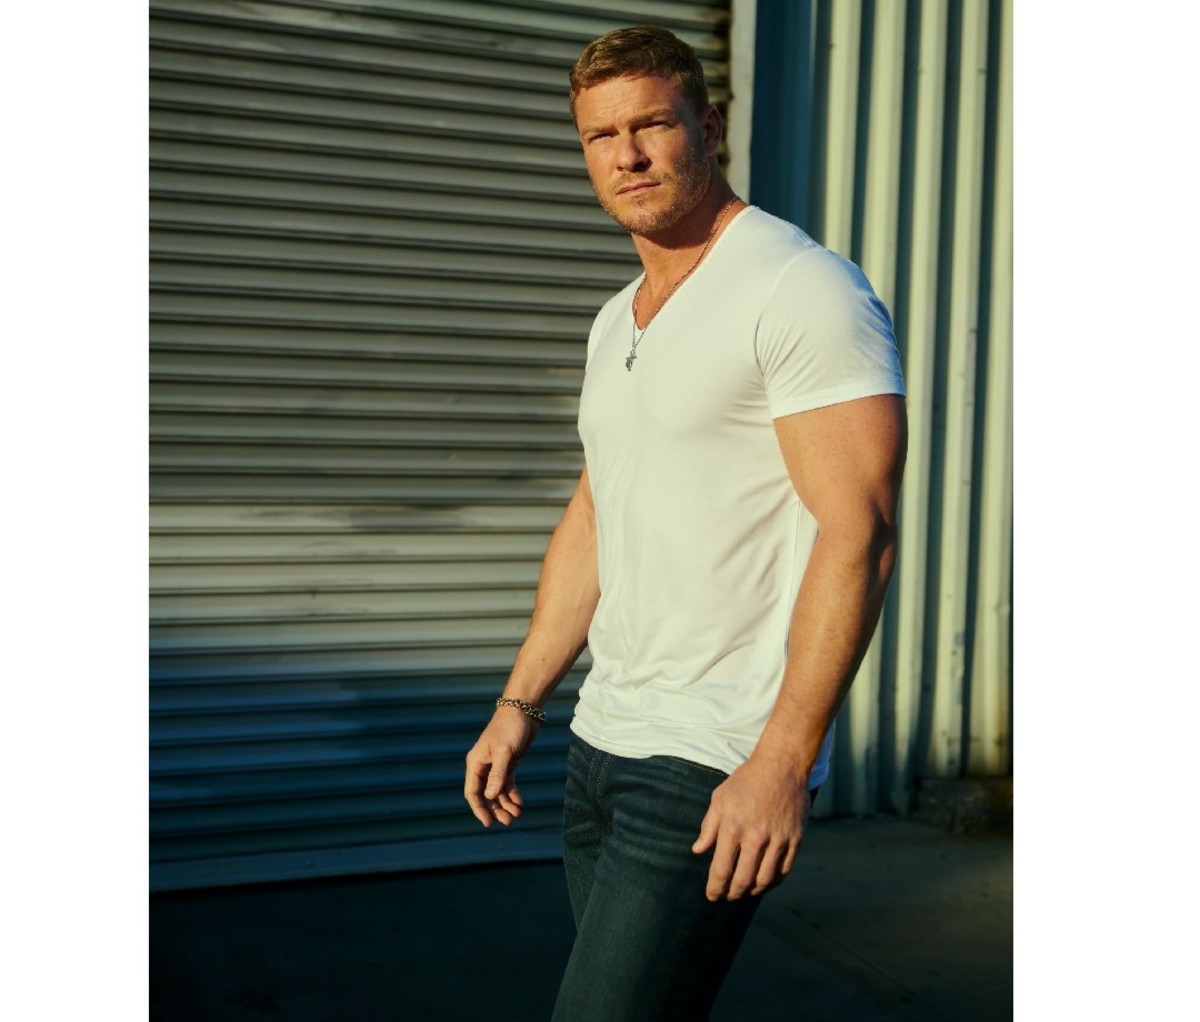 Actor Alan Ritchson stands outside in a white t-shirt during a scene from Amazon's 